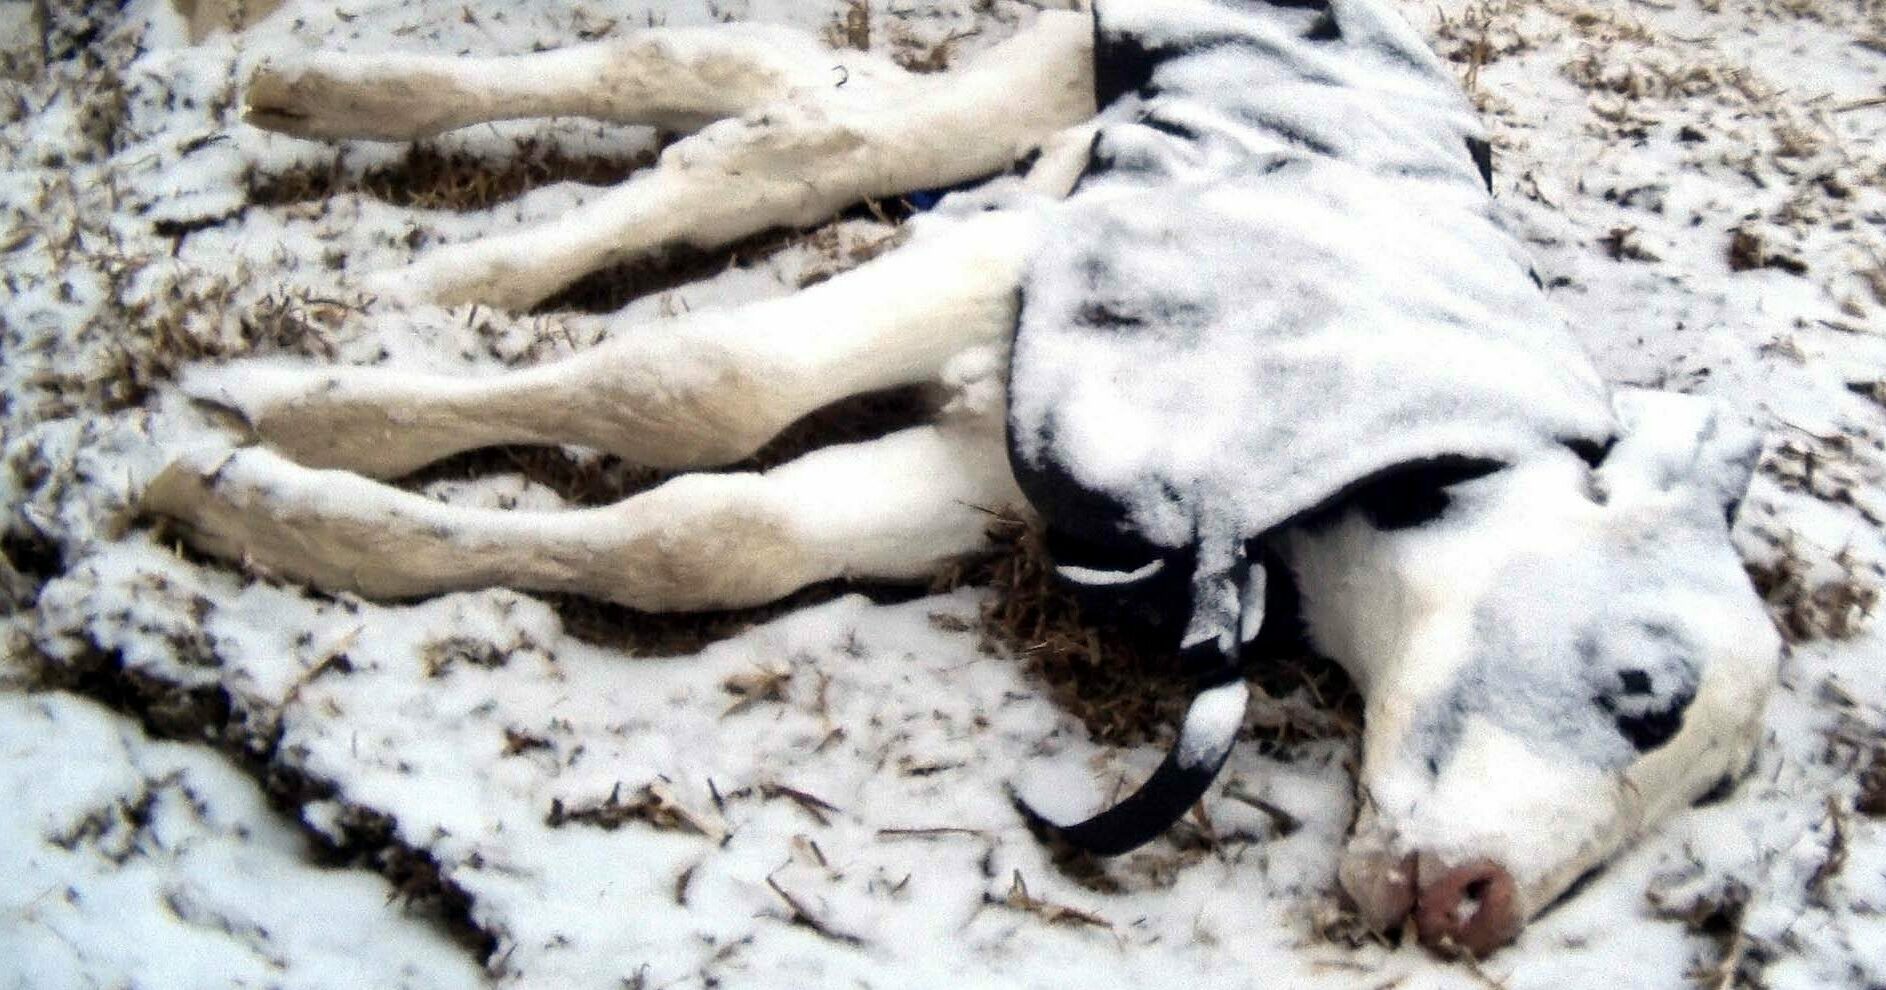 cropped cropped summit ranch calf snow frozen baby cow 3000x1000 1 e1661797928561 “I’ll Never Forget What I Saw”